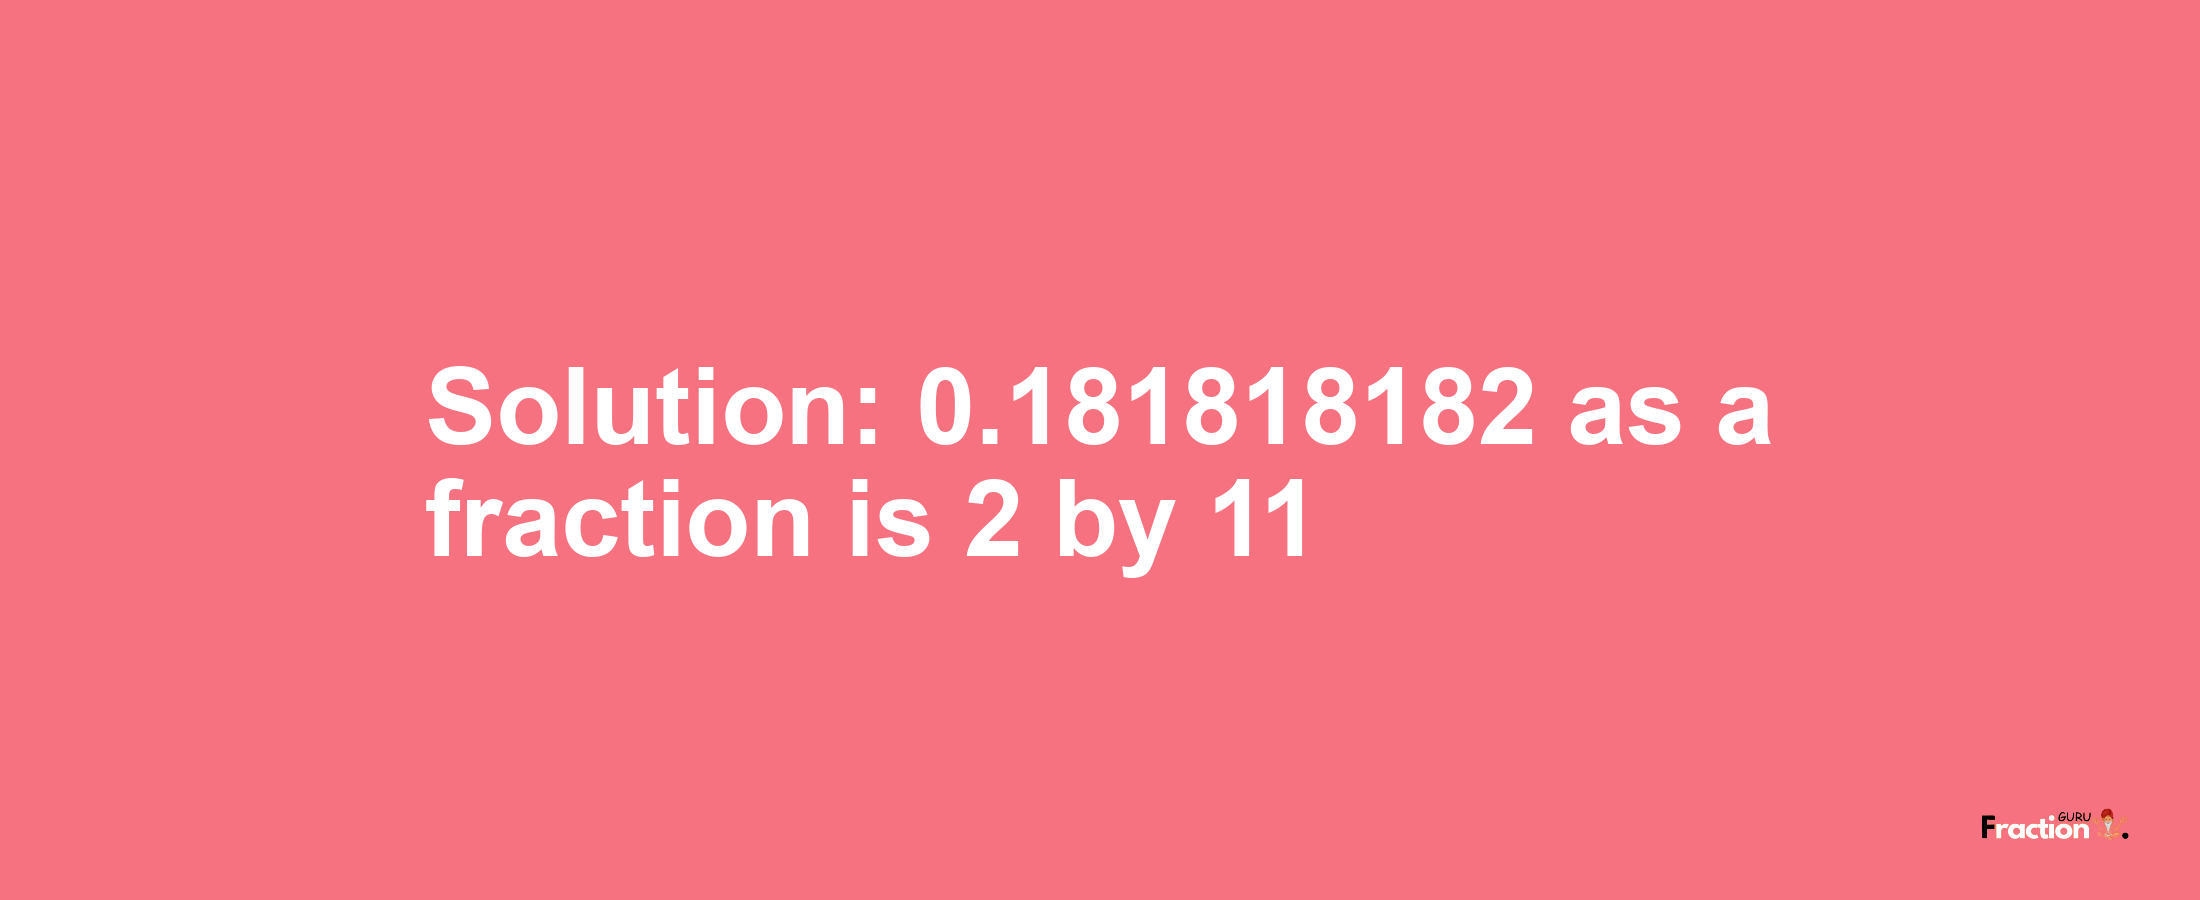 Solution:0.181818182 as a fraction is 2/11